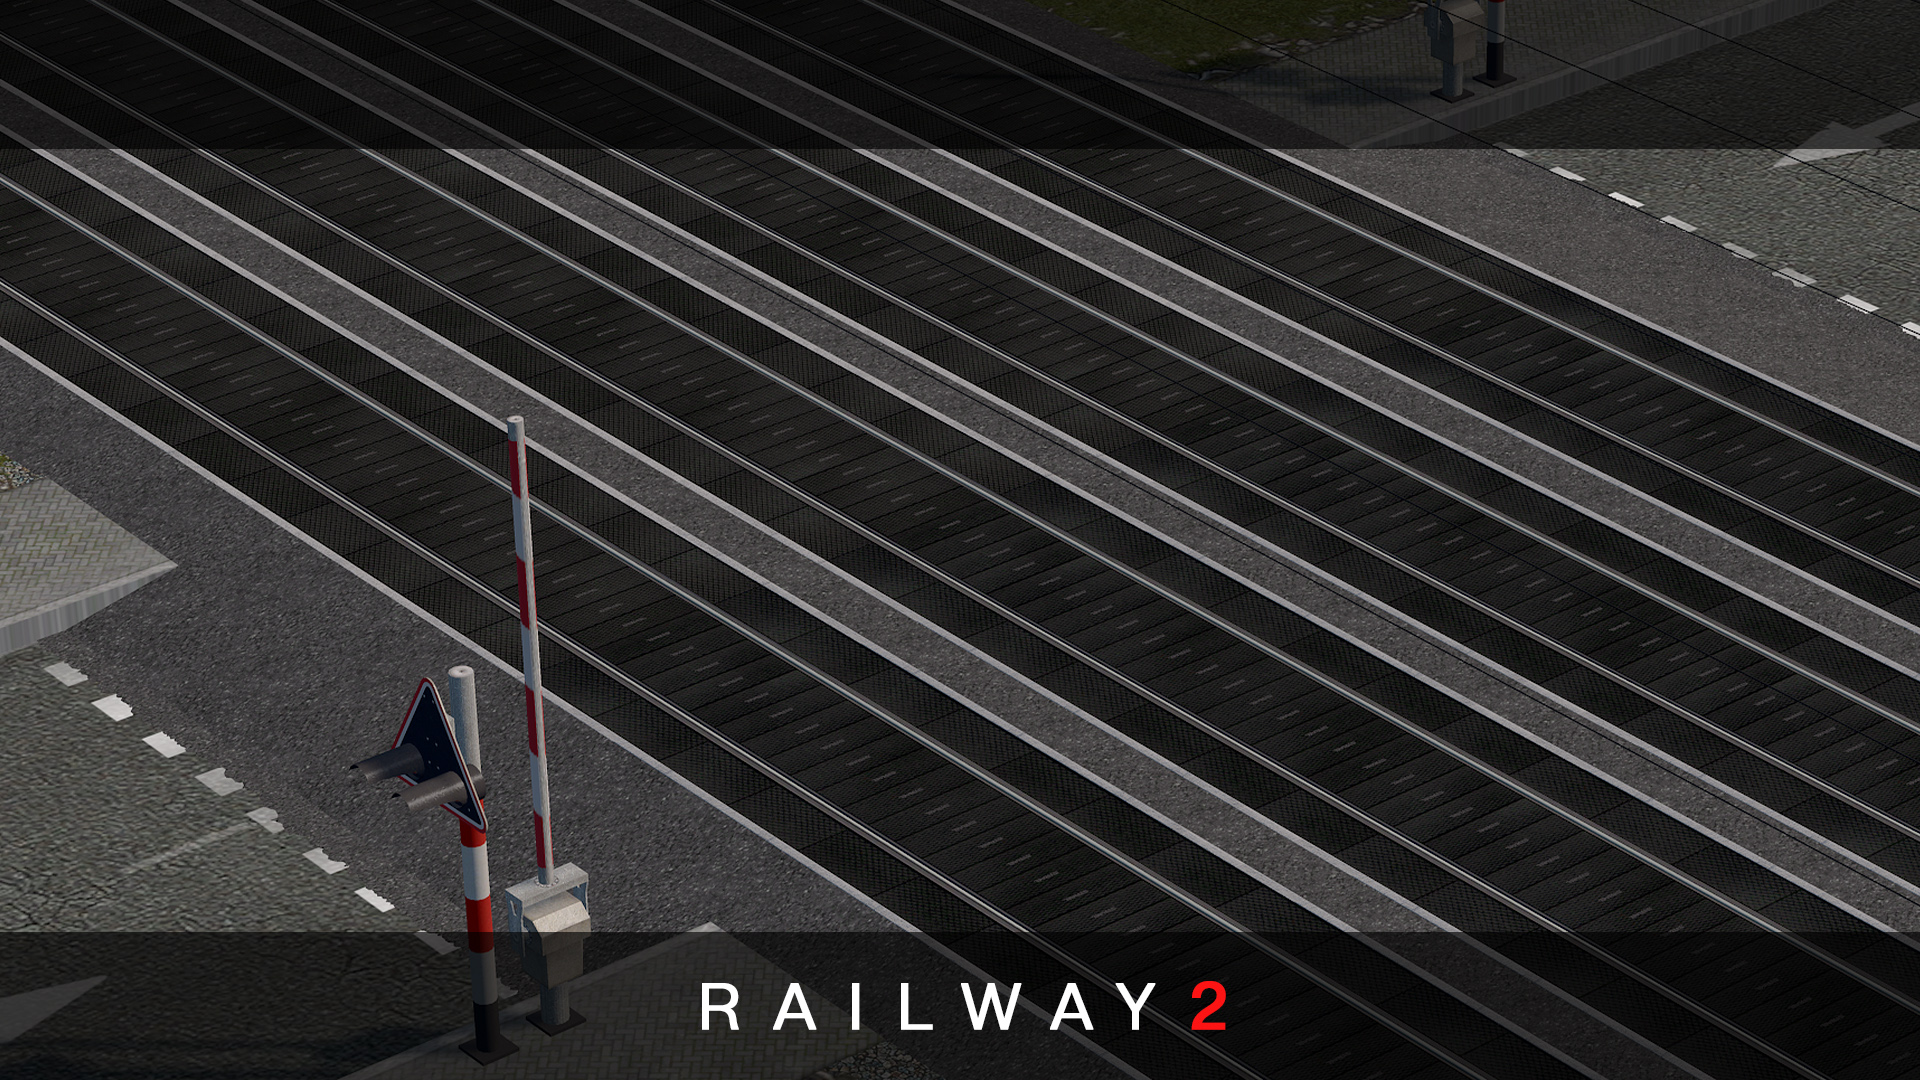 Cities: Skylines List of Railway 2 + Features + Modding Tutorial Information - 4.1 Networks: Core Features - 891541F